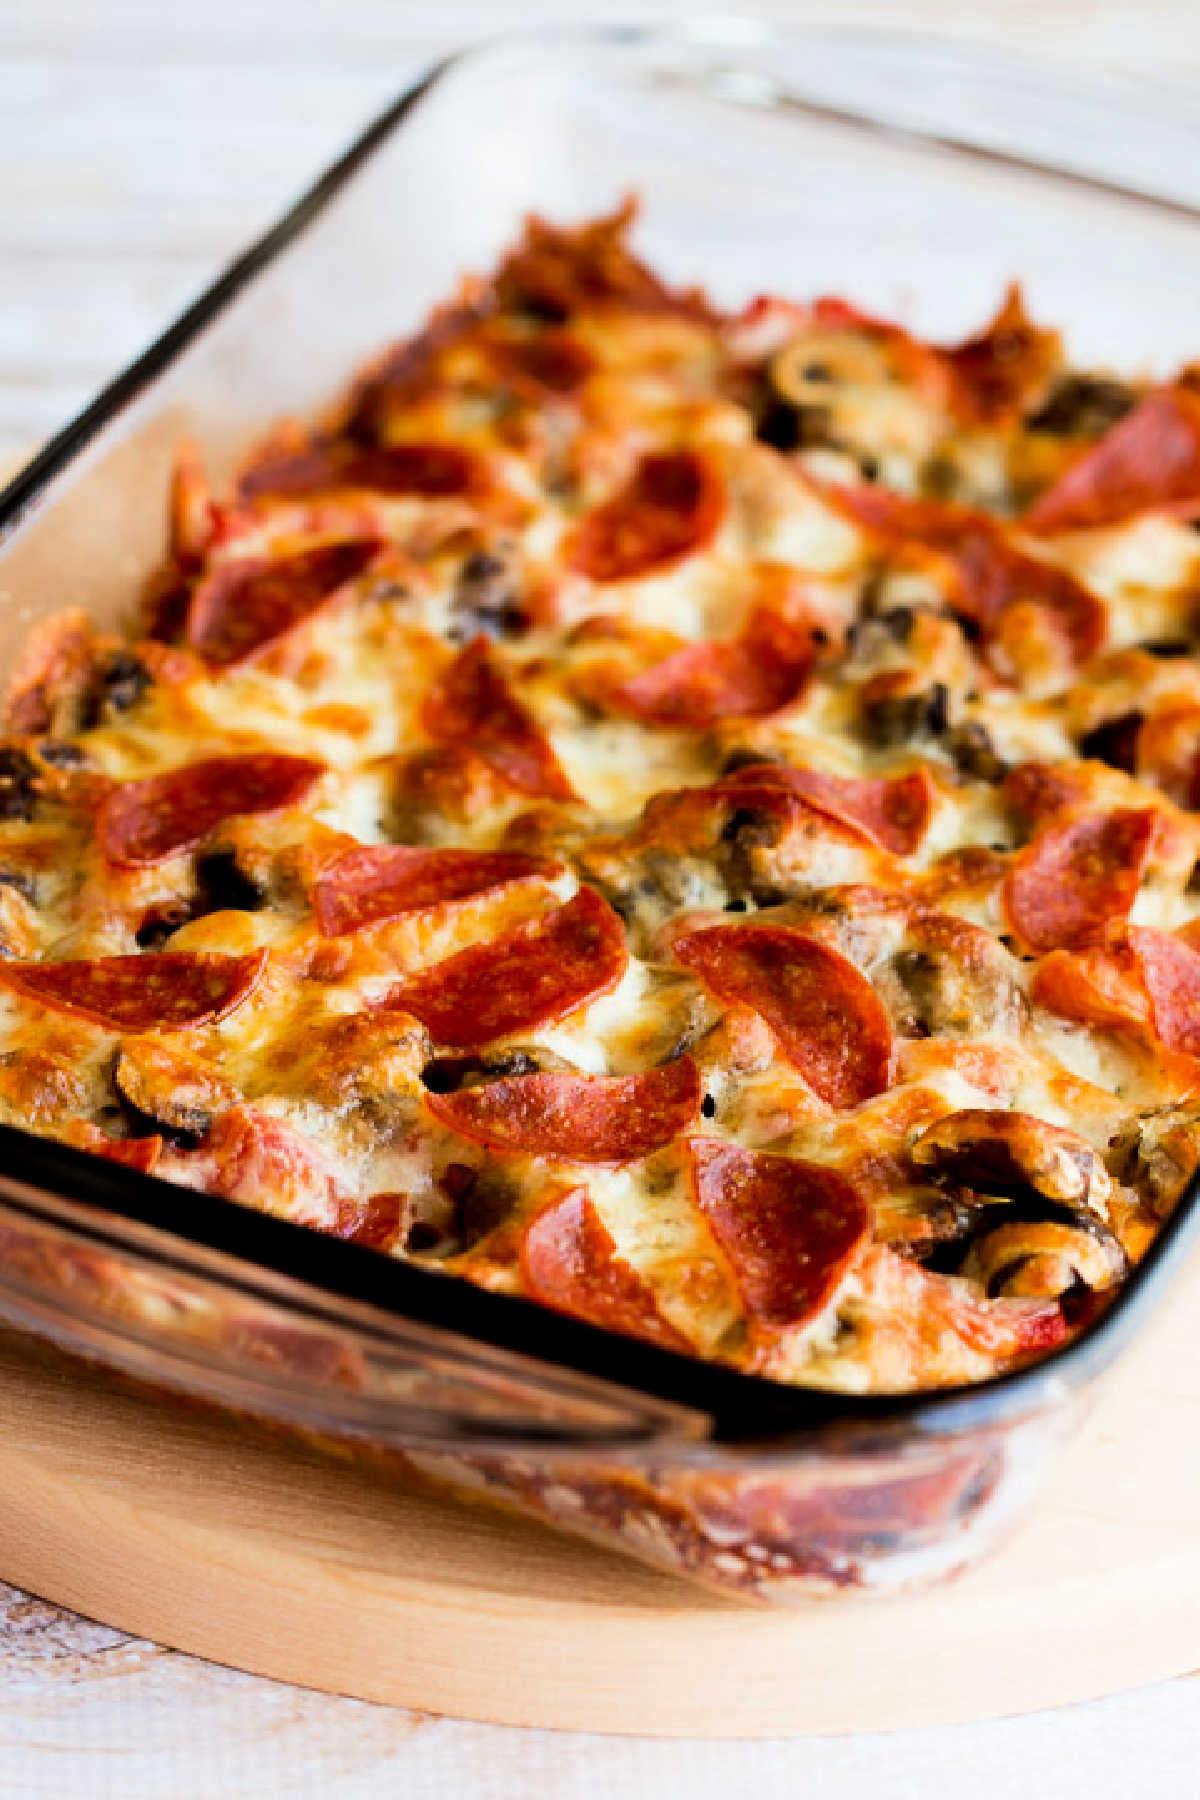 Low-Carb Deconstructed Pizza Casserole shown in baking dish